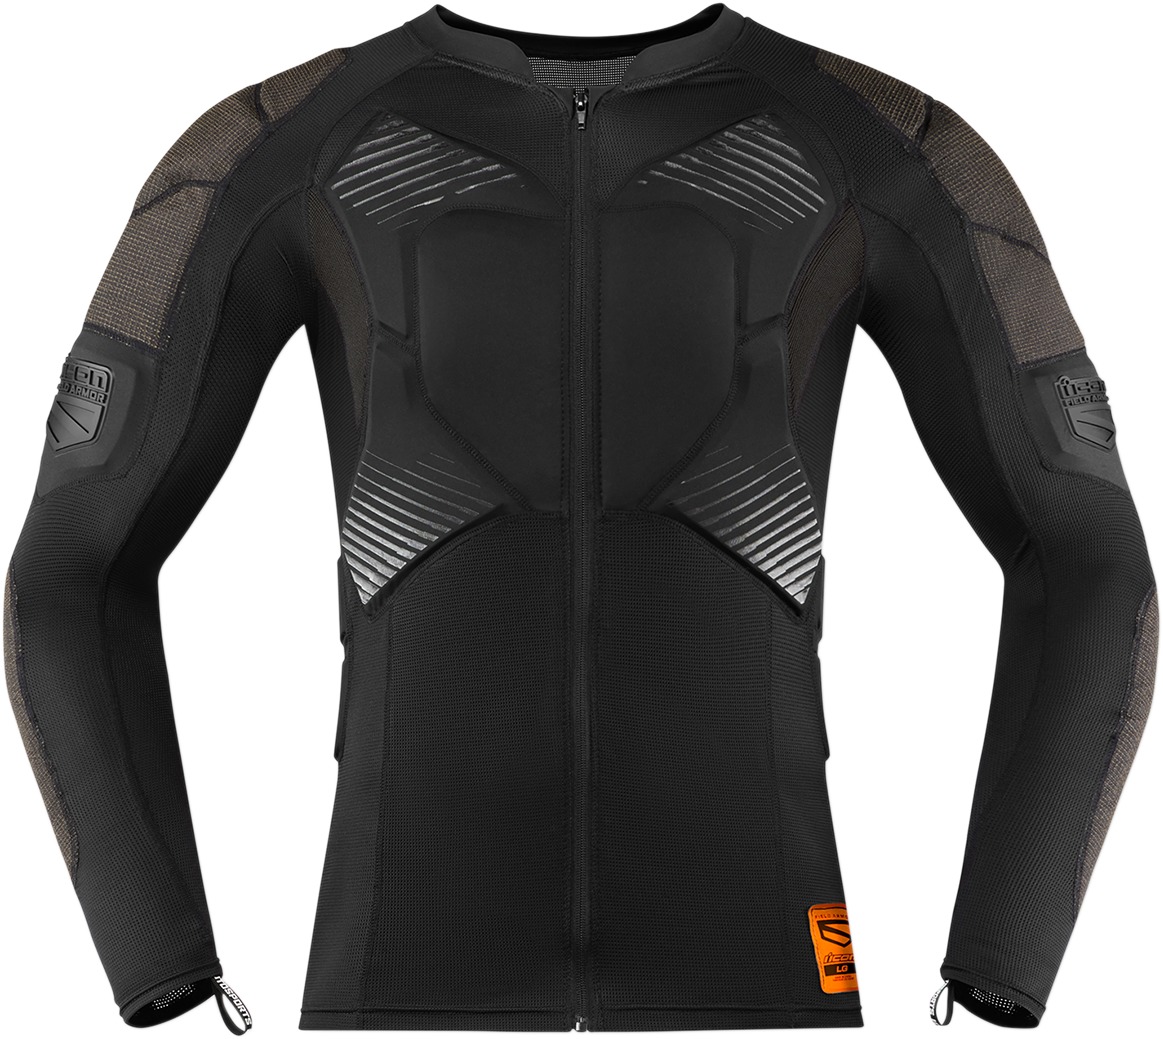 Long-Sleeve Compression Armor Shirt Black X-Large - Click Image to Close